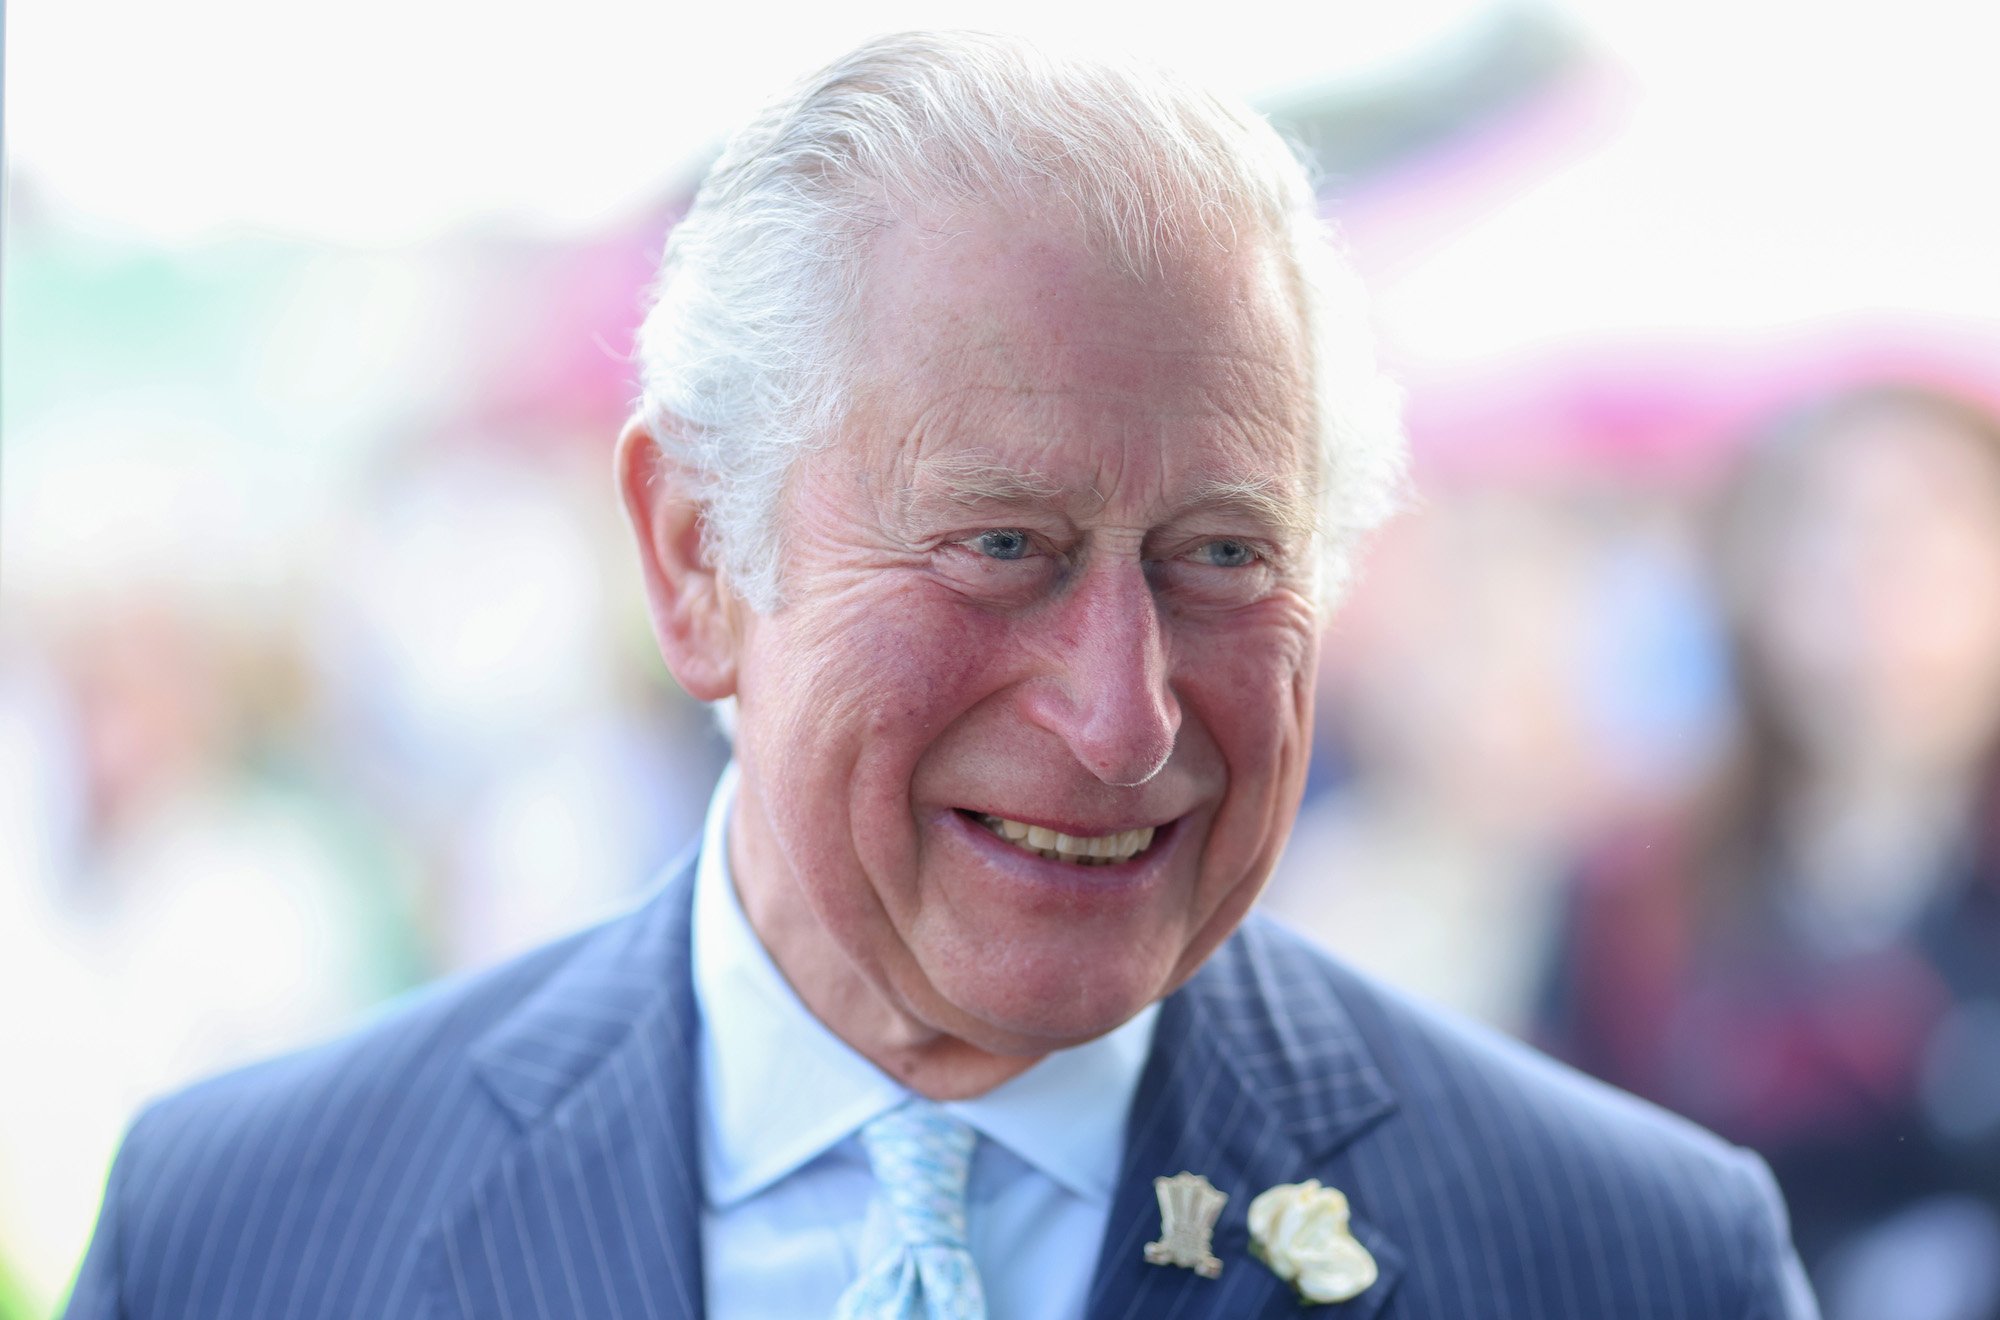 Charles, Prince of Wales smiling in front of a blurred crowd